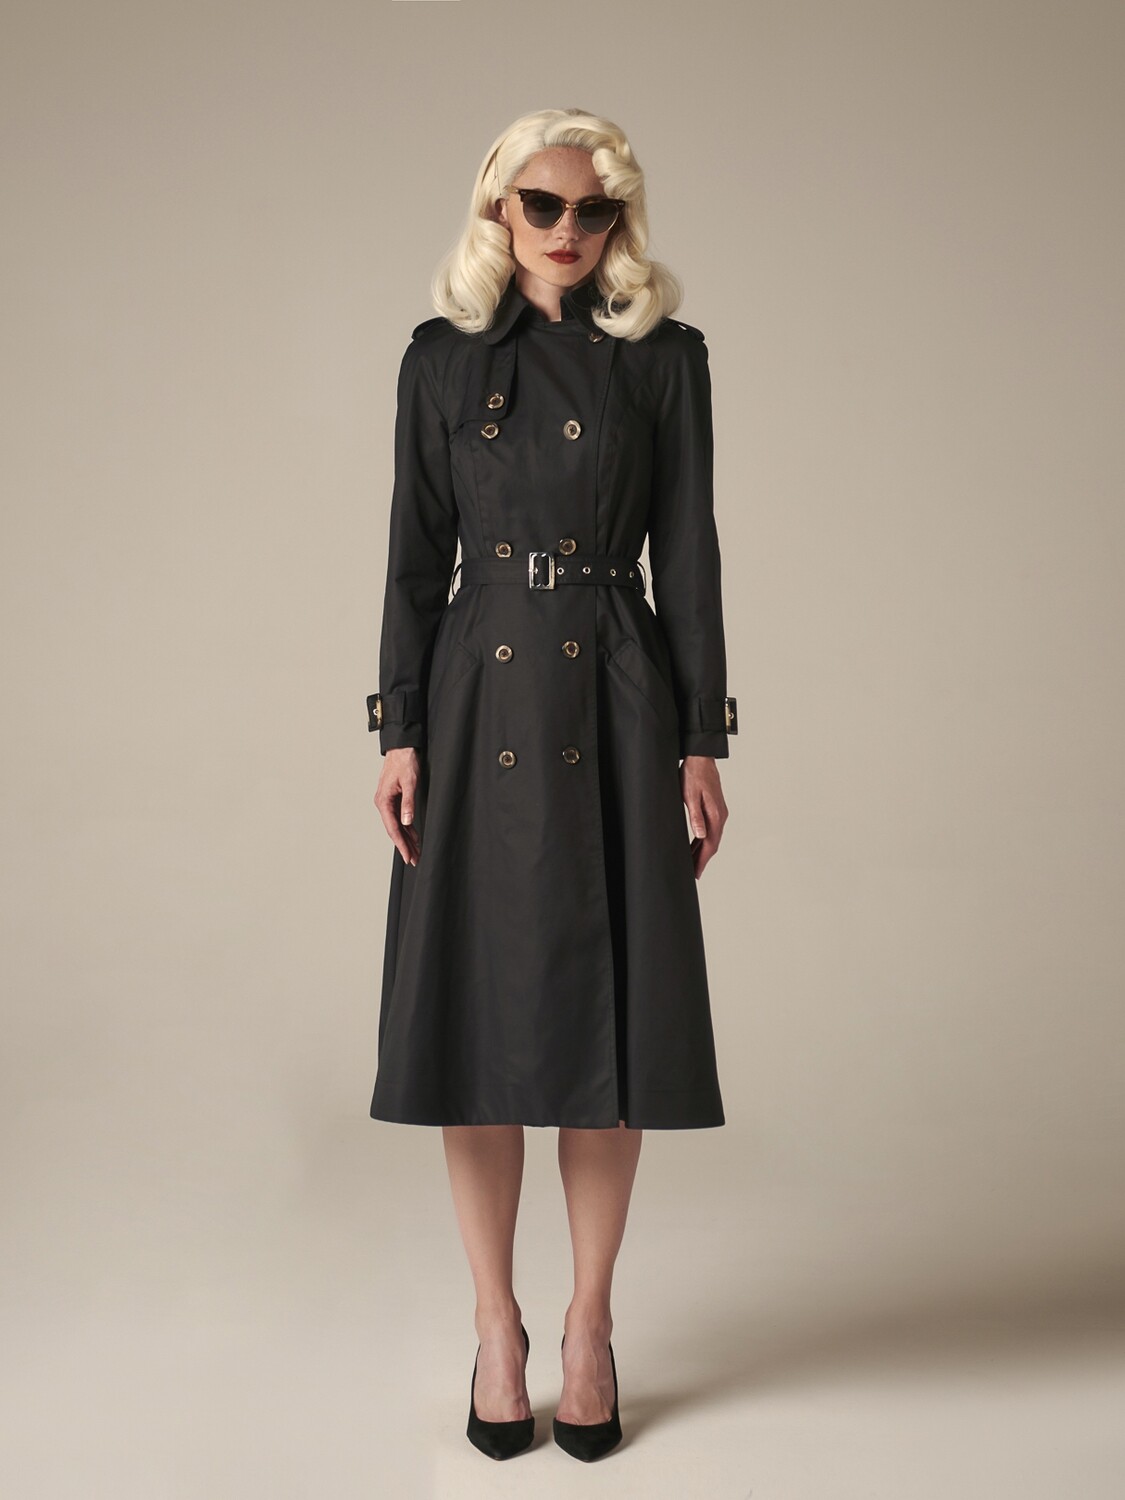 A-silhouette "Trench coat"